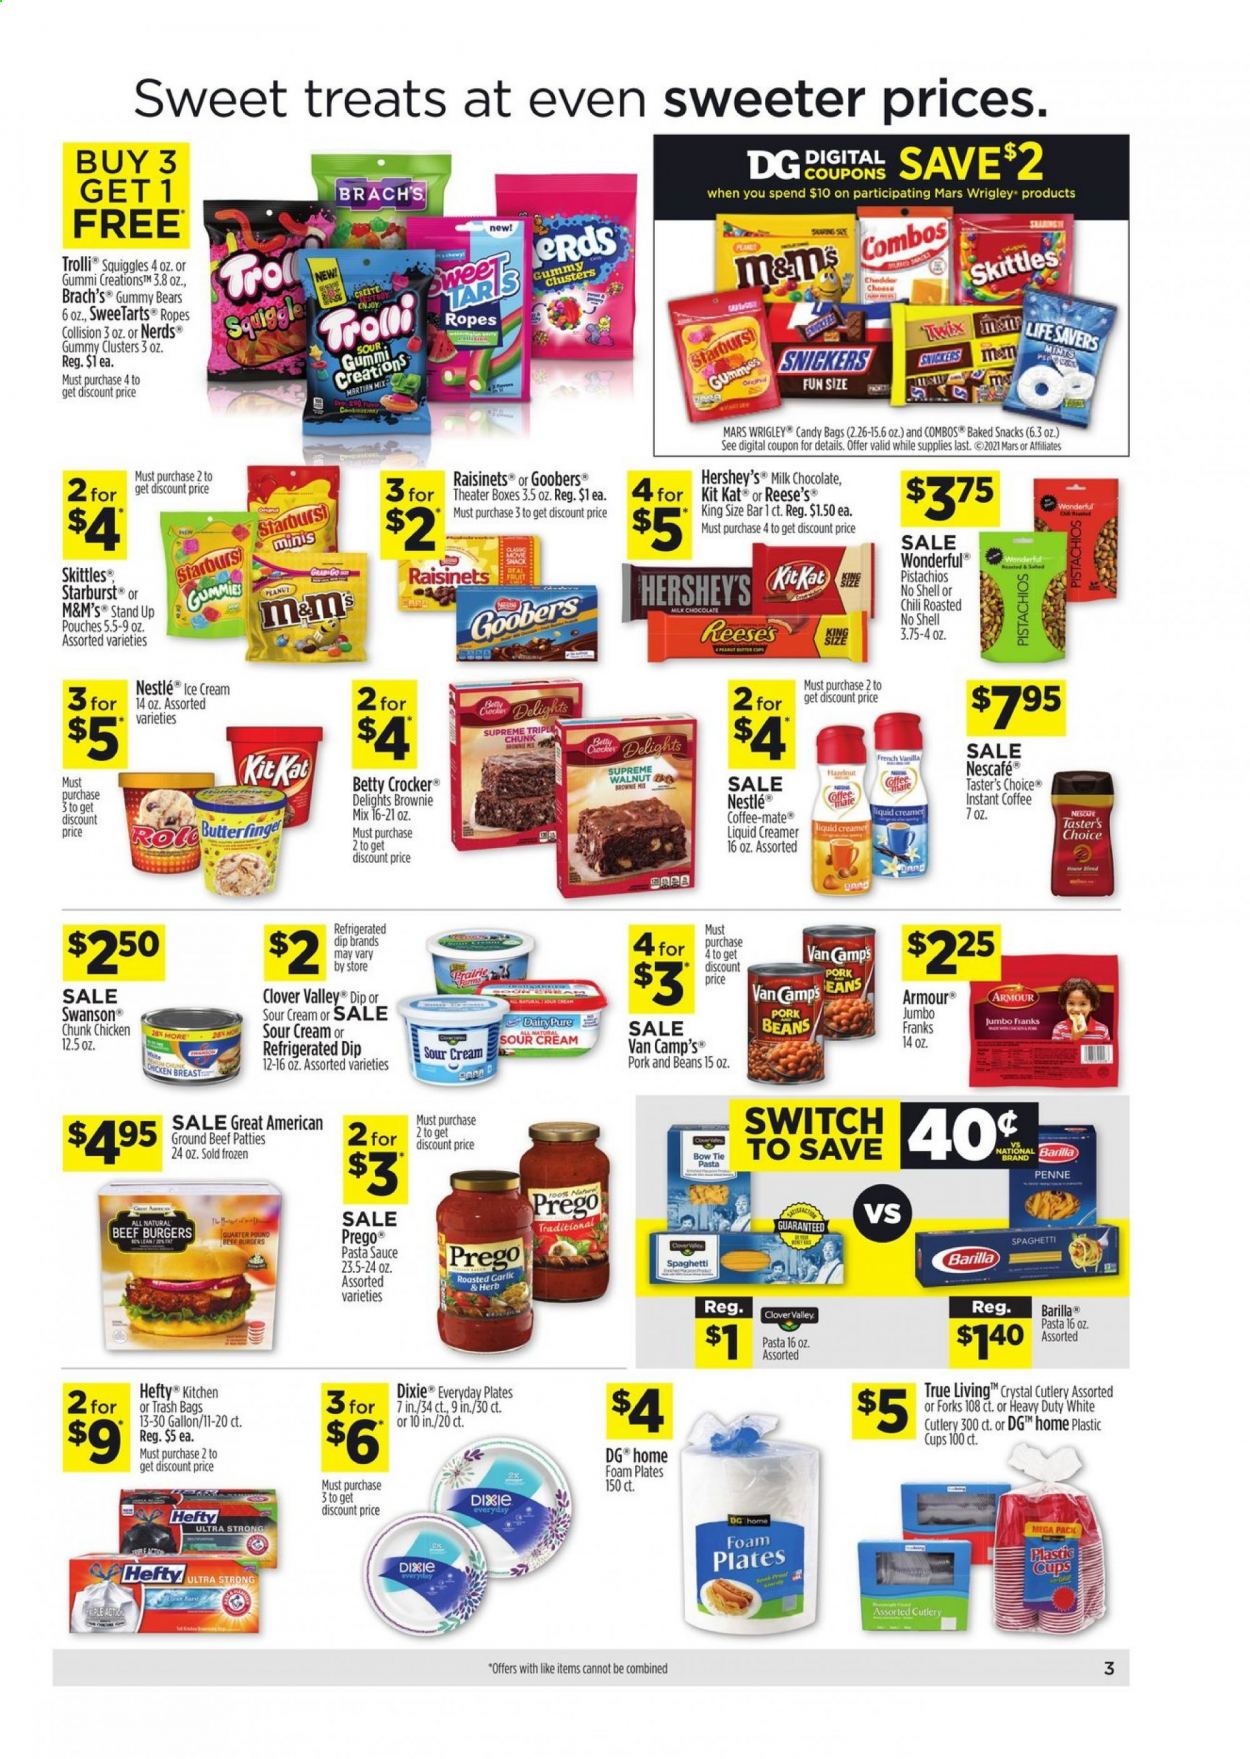 thumbnail - Dollar General Flyer - 07/11/2021 - 07/17/2021 - Sales products - brownie mix, spaghetti, pasta sauce, hamburger, sauce, Barilla, beef burger, Clover, Coffee-Mate, sour cream, creamer, dip, ice cream, Reese's, Hershey's, milk chocolate, Nestlé, snack, Trolli, Snickers, Twix, Mars, KitKat, M&M's, Skittles, Starburst, penne, herbs, pistachios, instant coffee, Nescafé, beef meat, ground beef, Hefty, trash bags, Dixie, plate, cup, foam plates, bag, switch, Shell. Page 4.